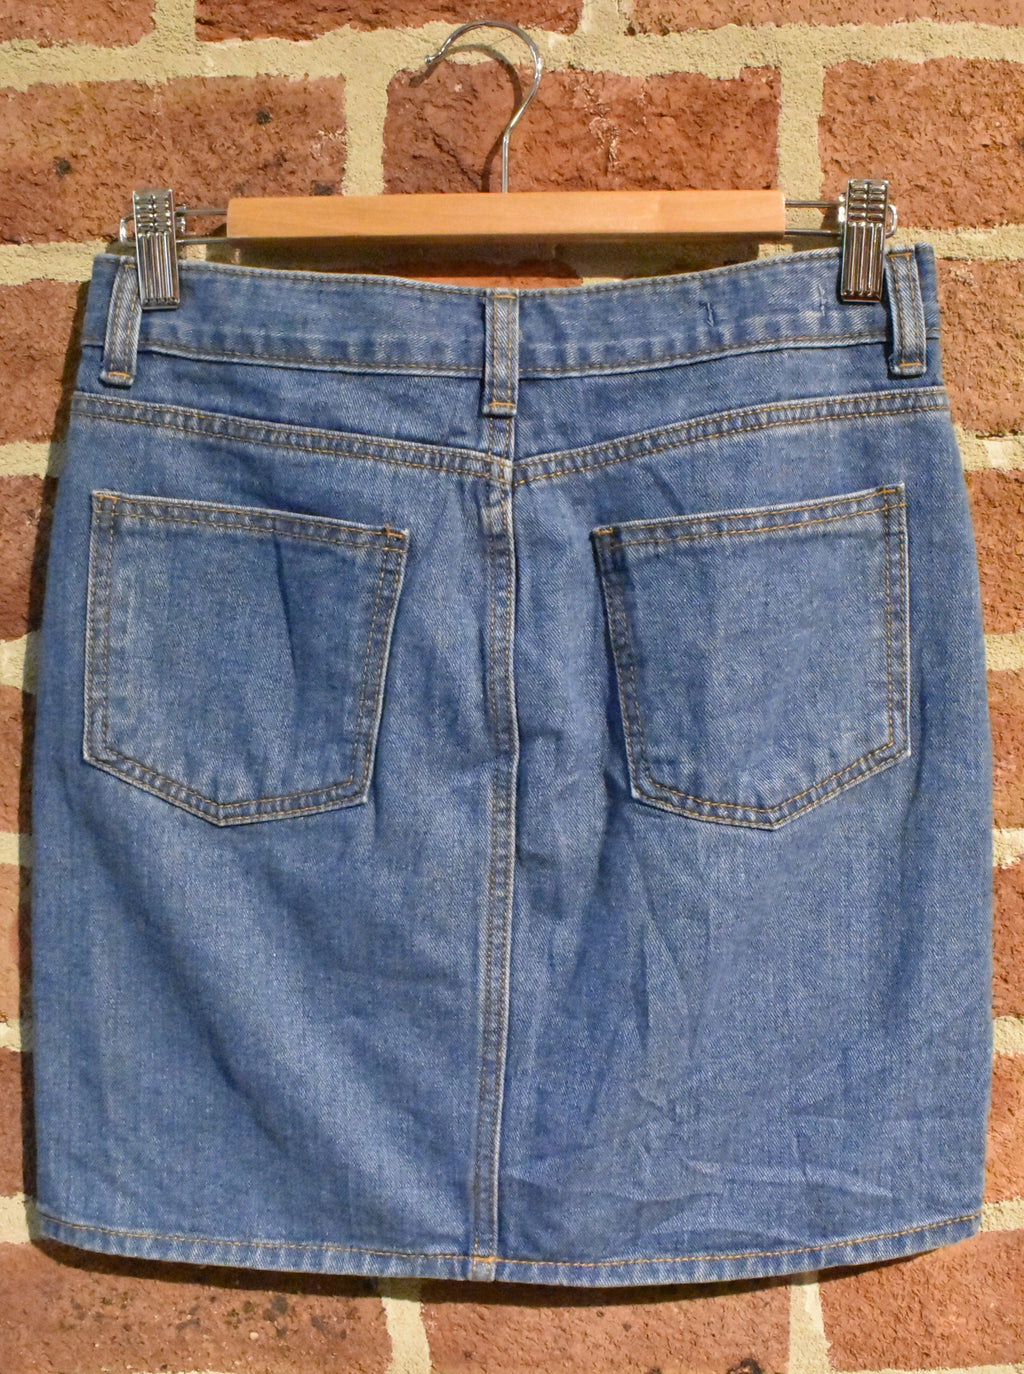 One Day Denim Skirt - AS IS - marks